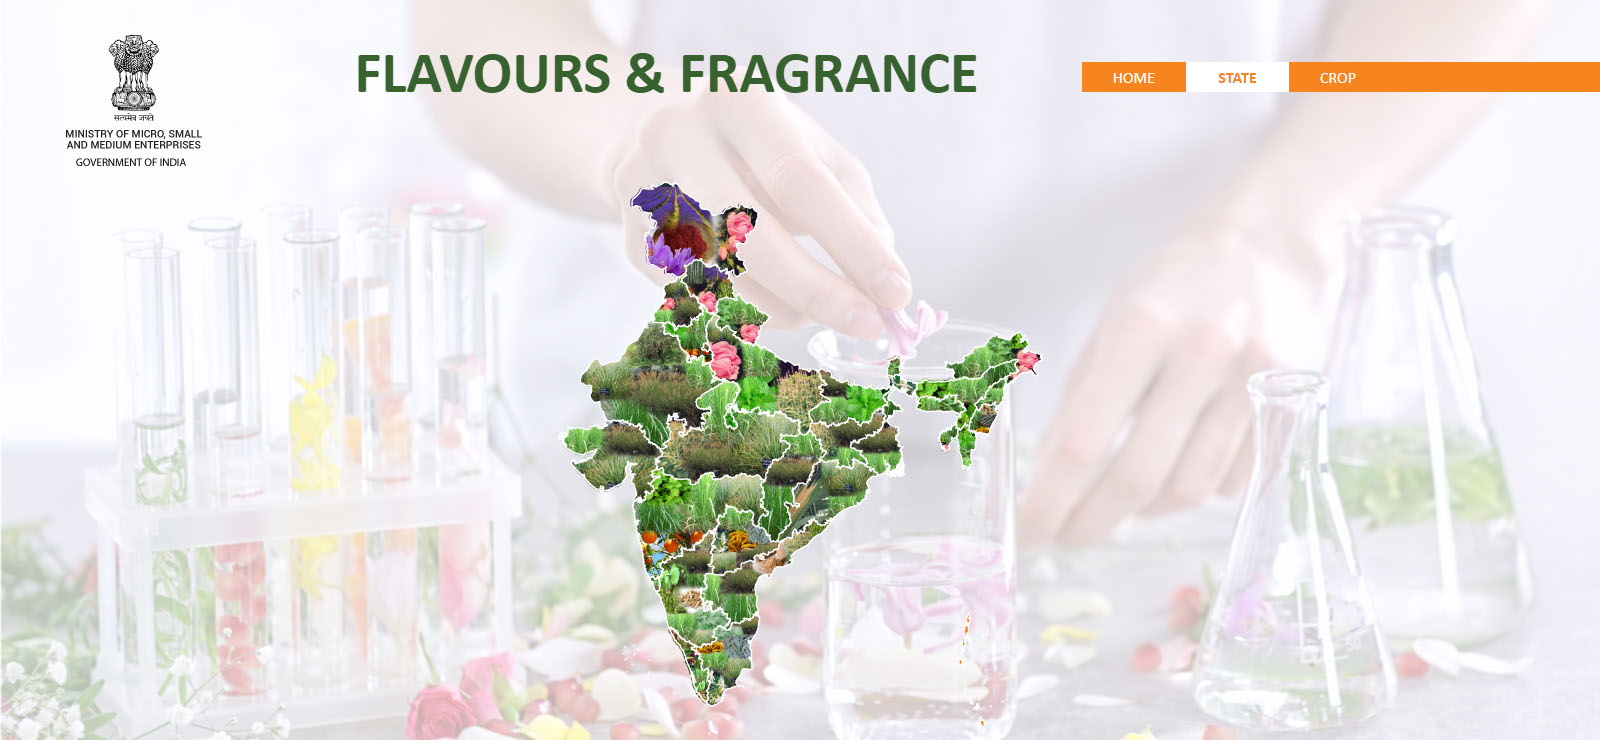 flavours-and-fragrance-state